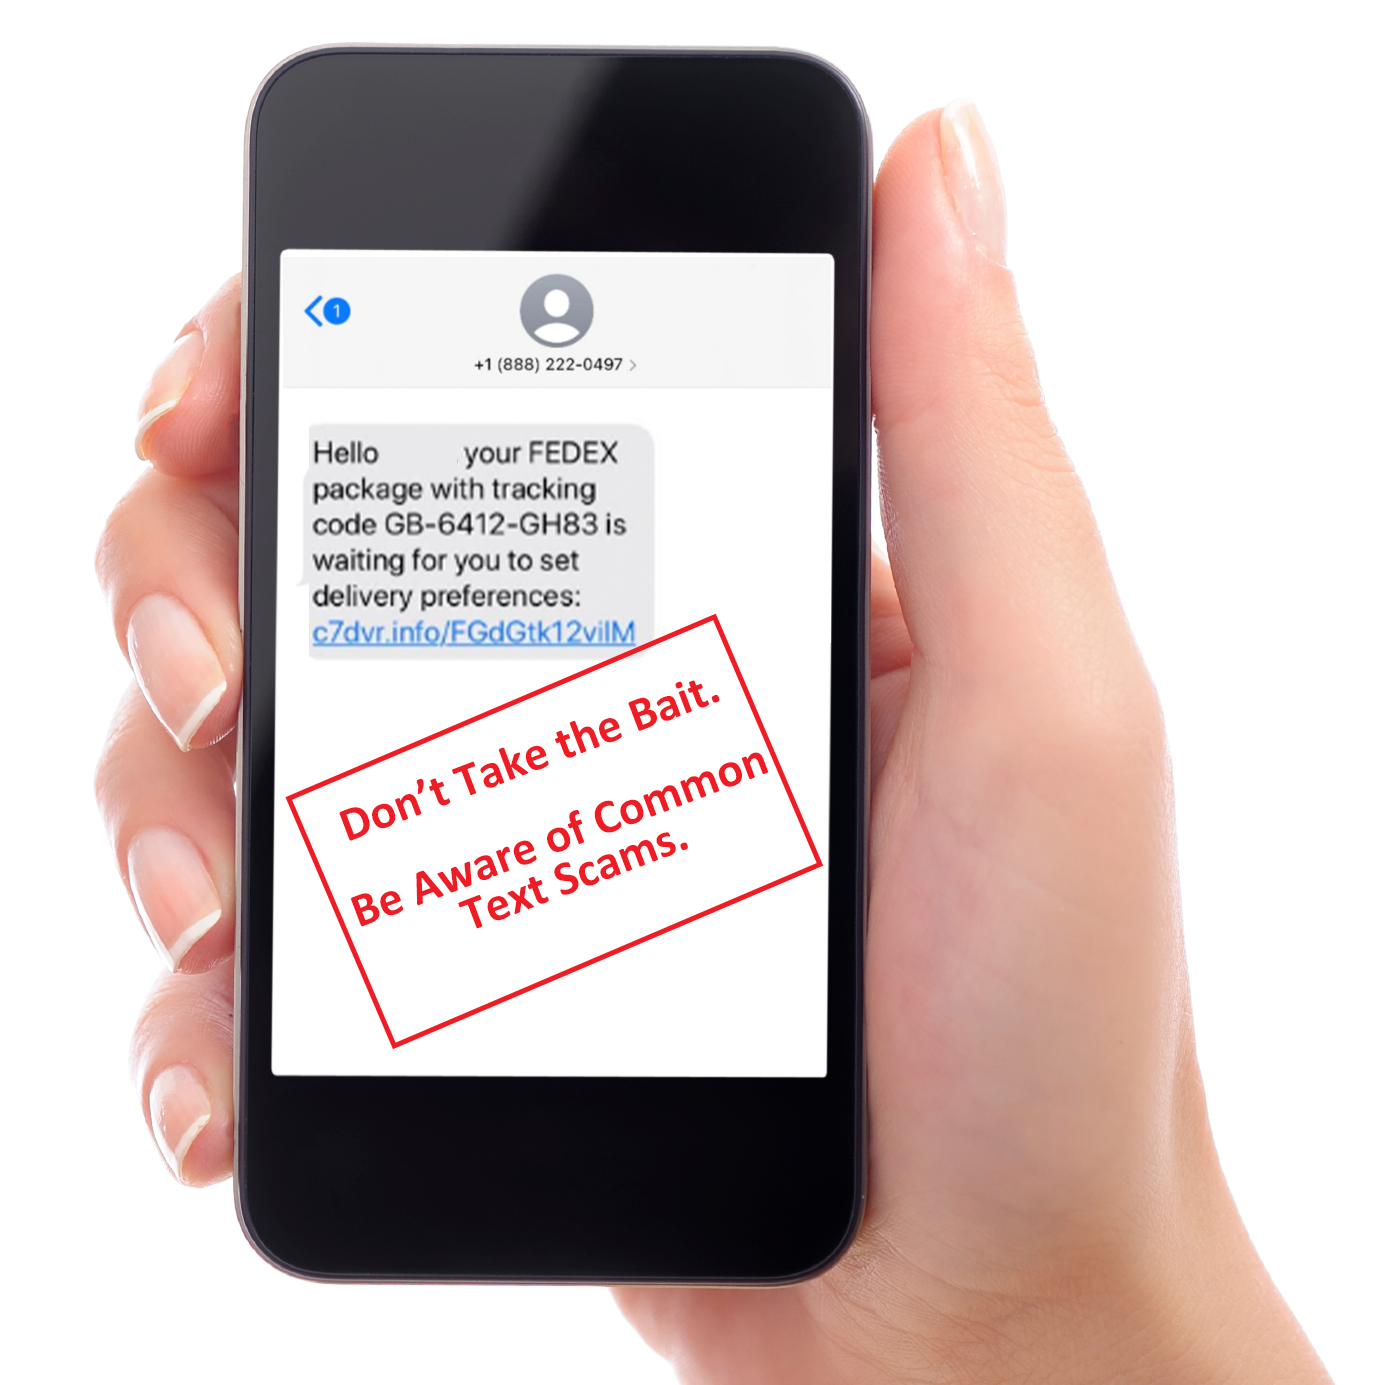 Image of a hand holding a smart phone displaying a text scam known as smishing.